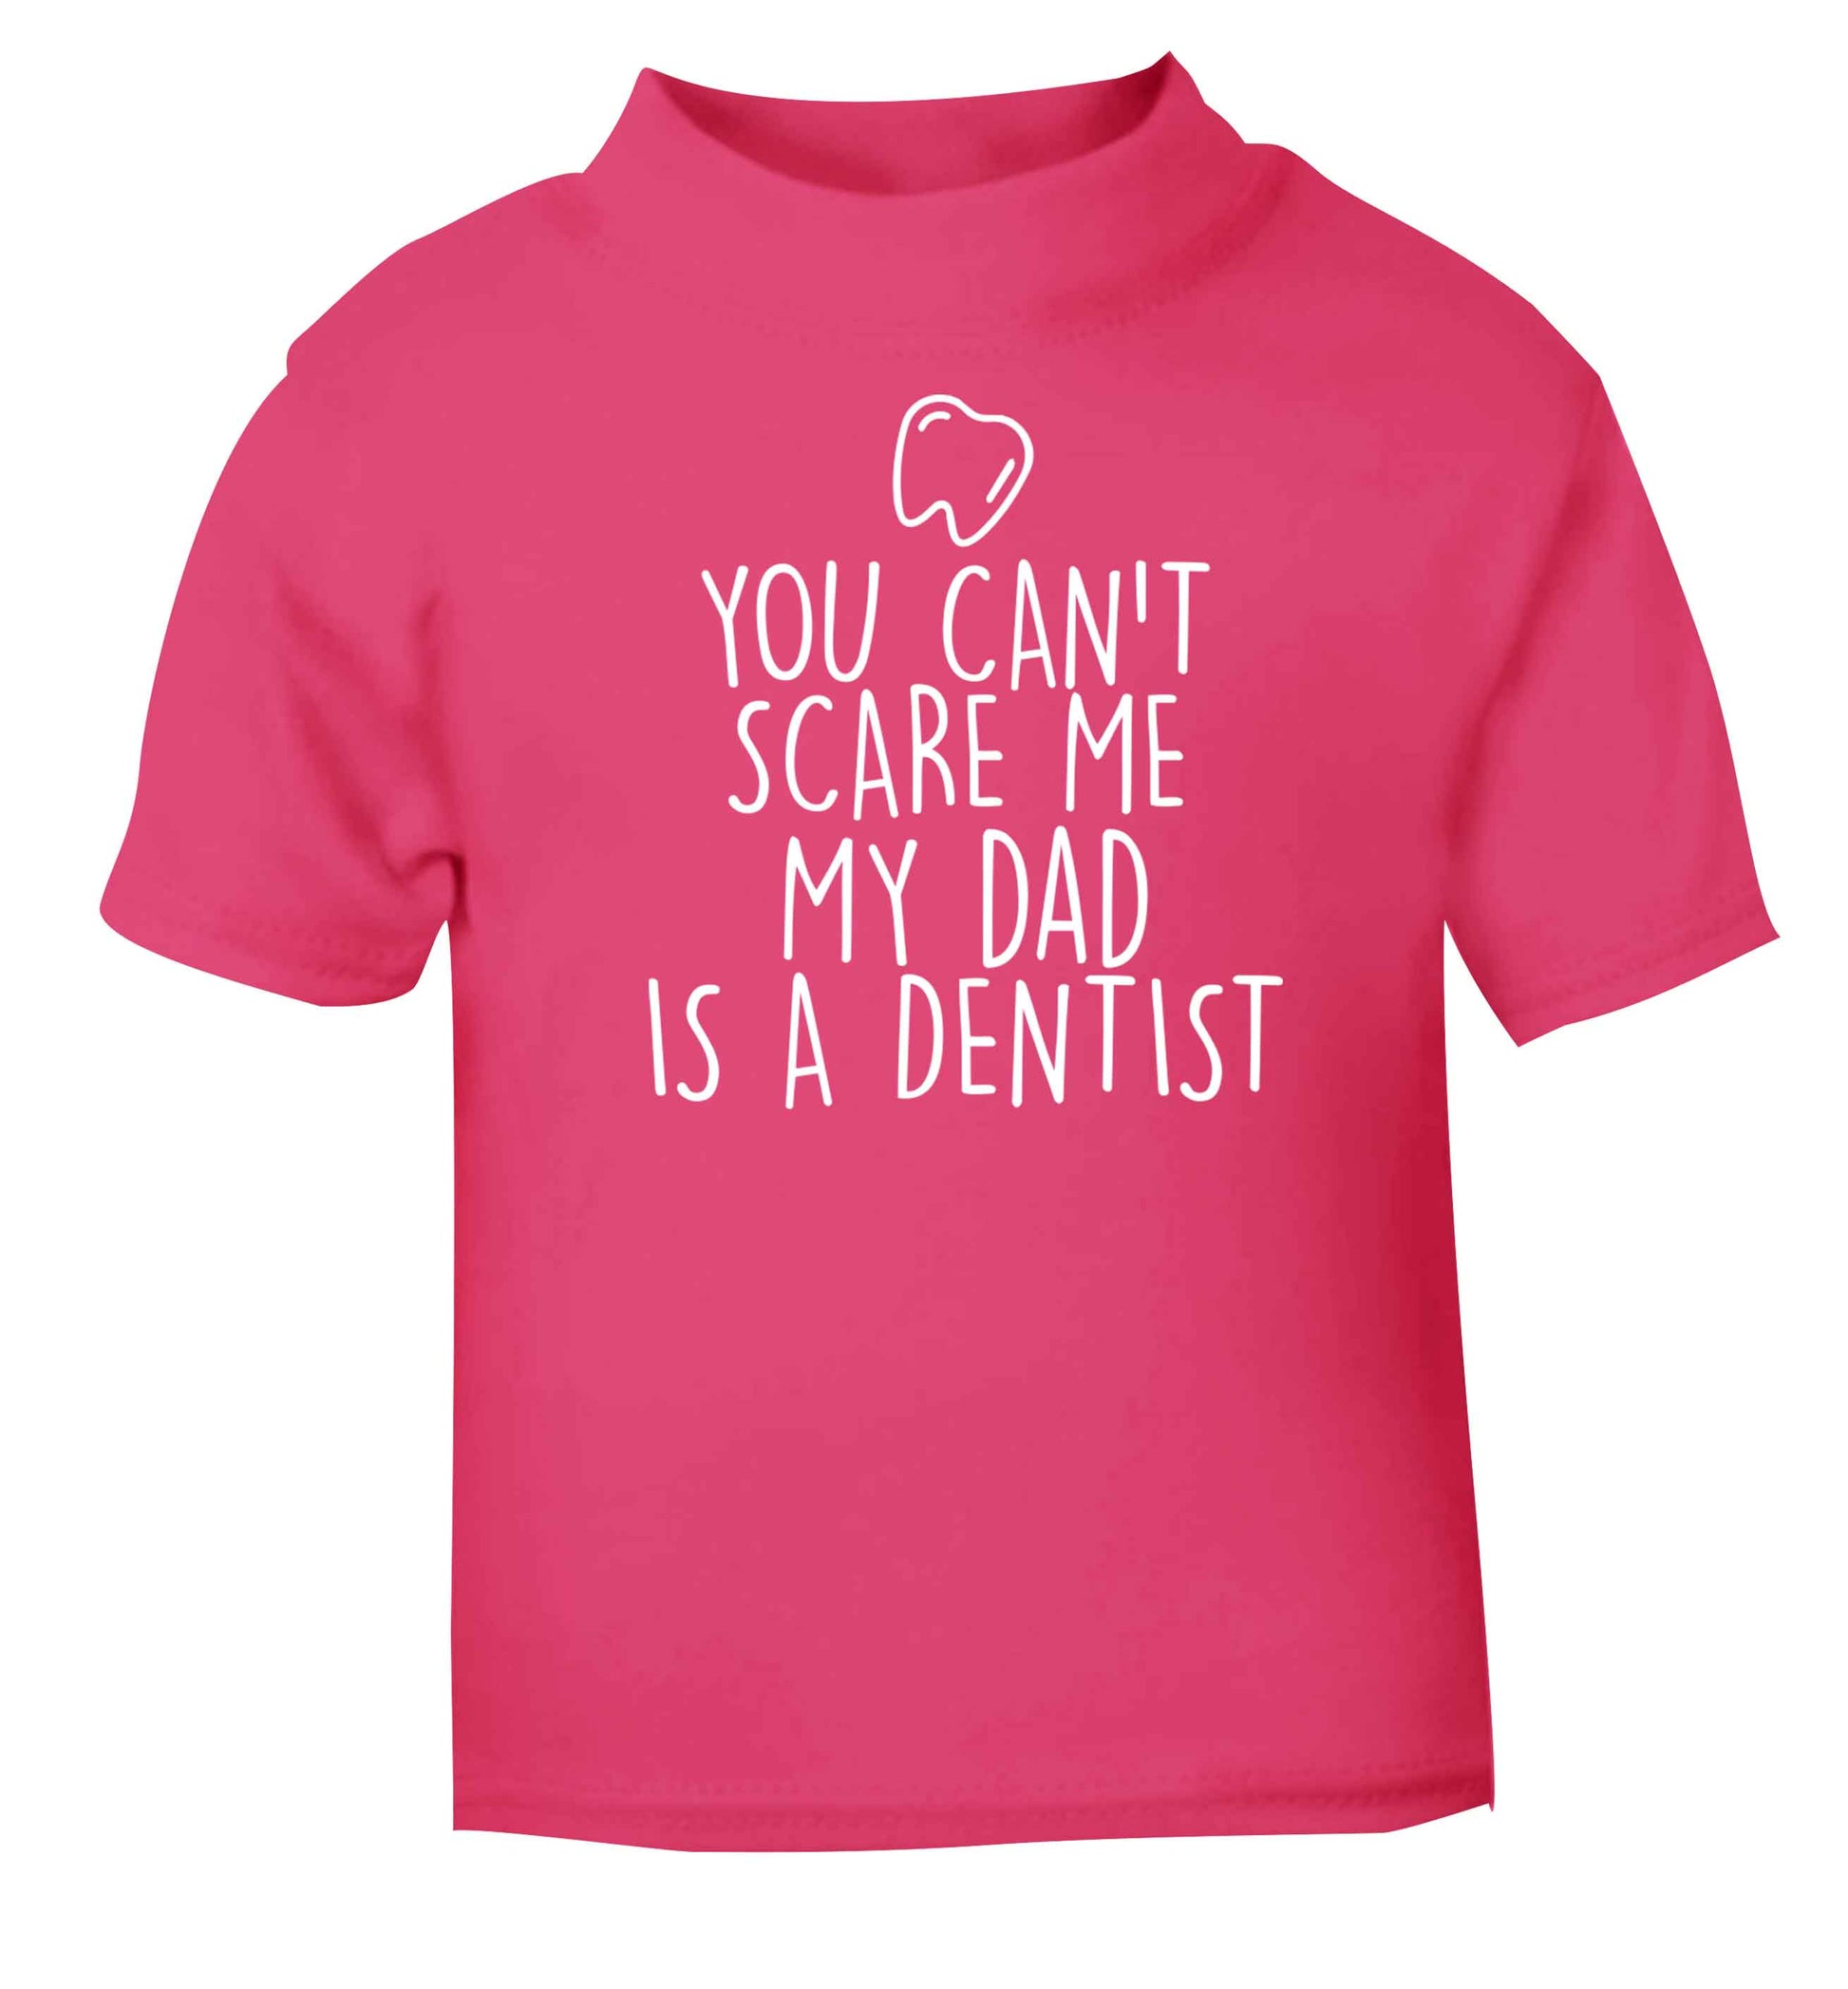 You can't scare me my dad is a dentist pink baby toddler Tshirt 2 Years